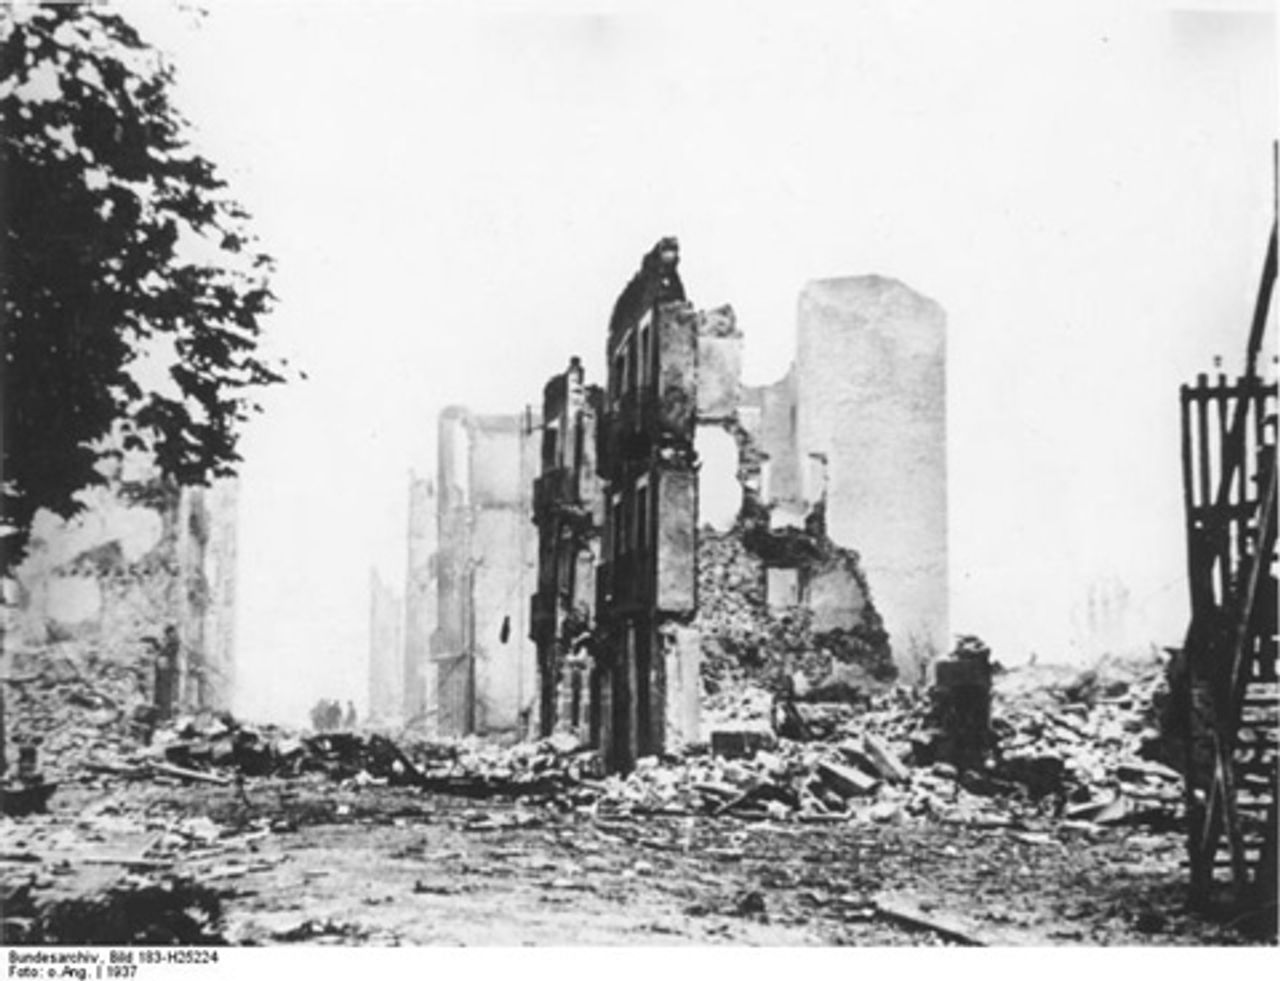 Aftermath of the bombing of Guernica, April 1937